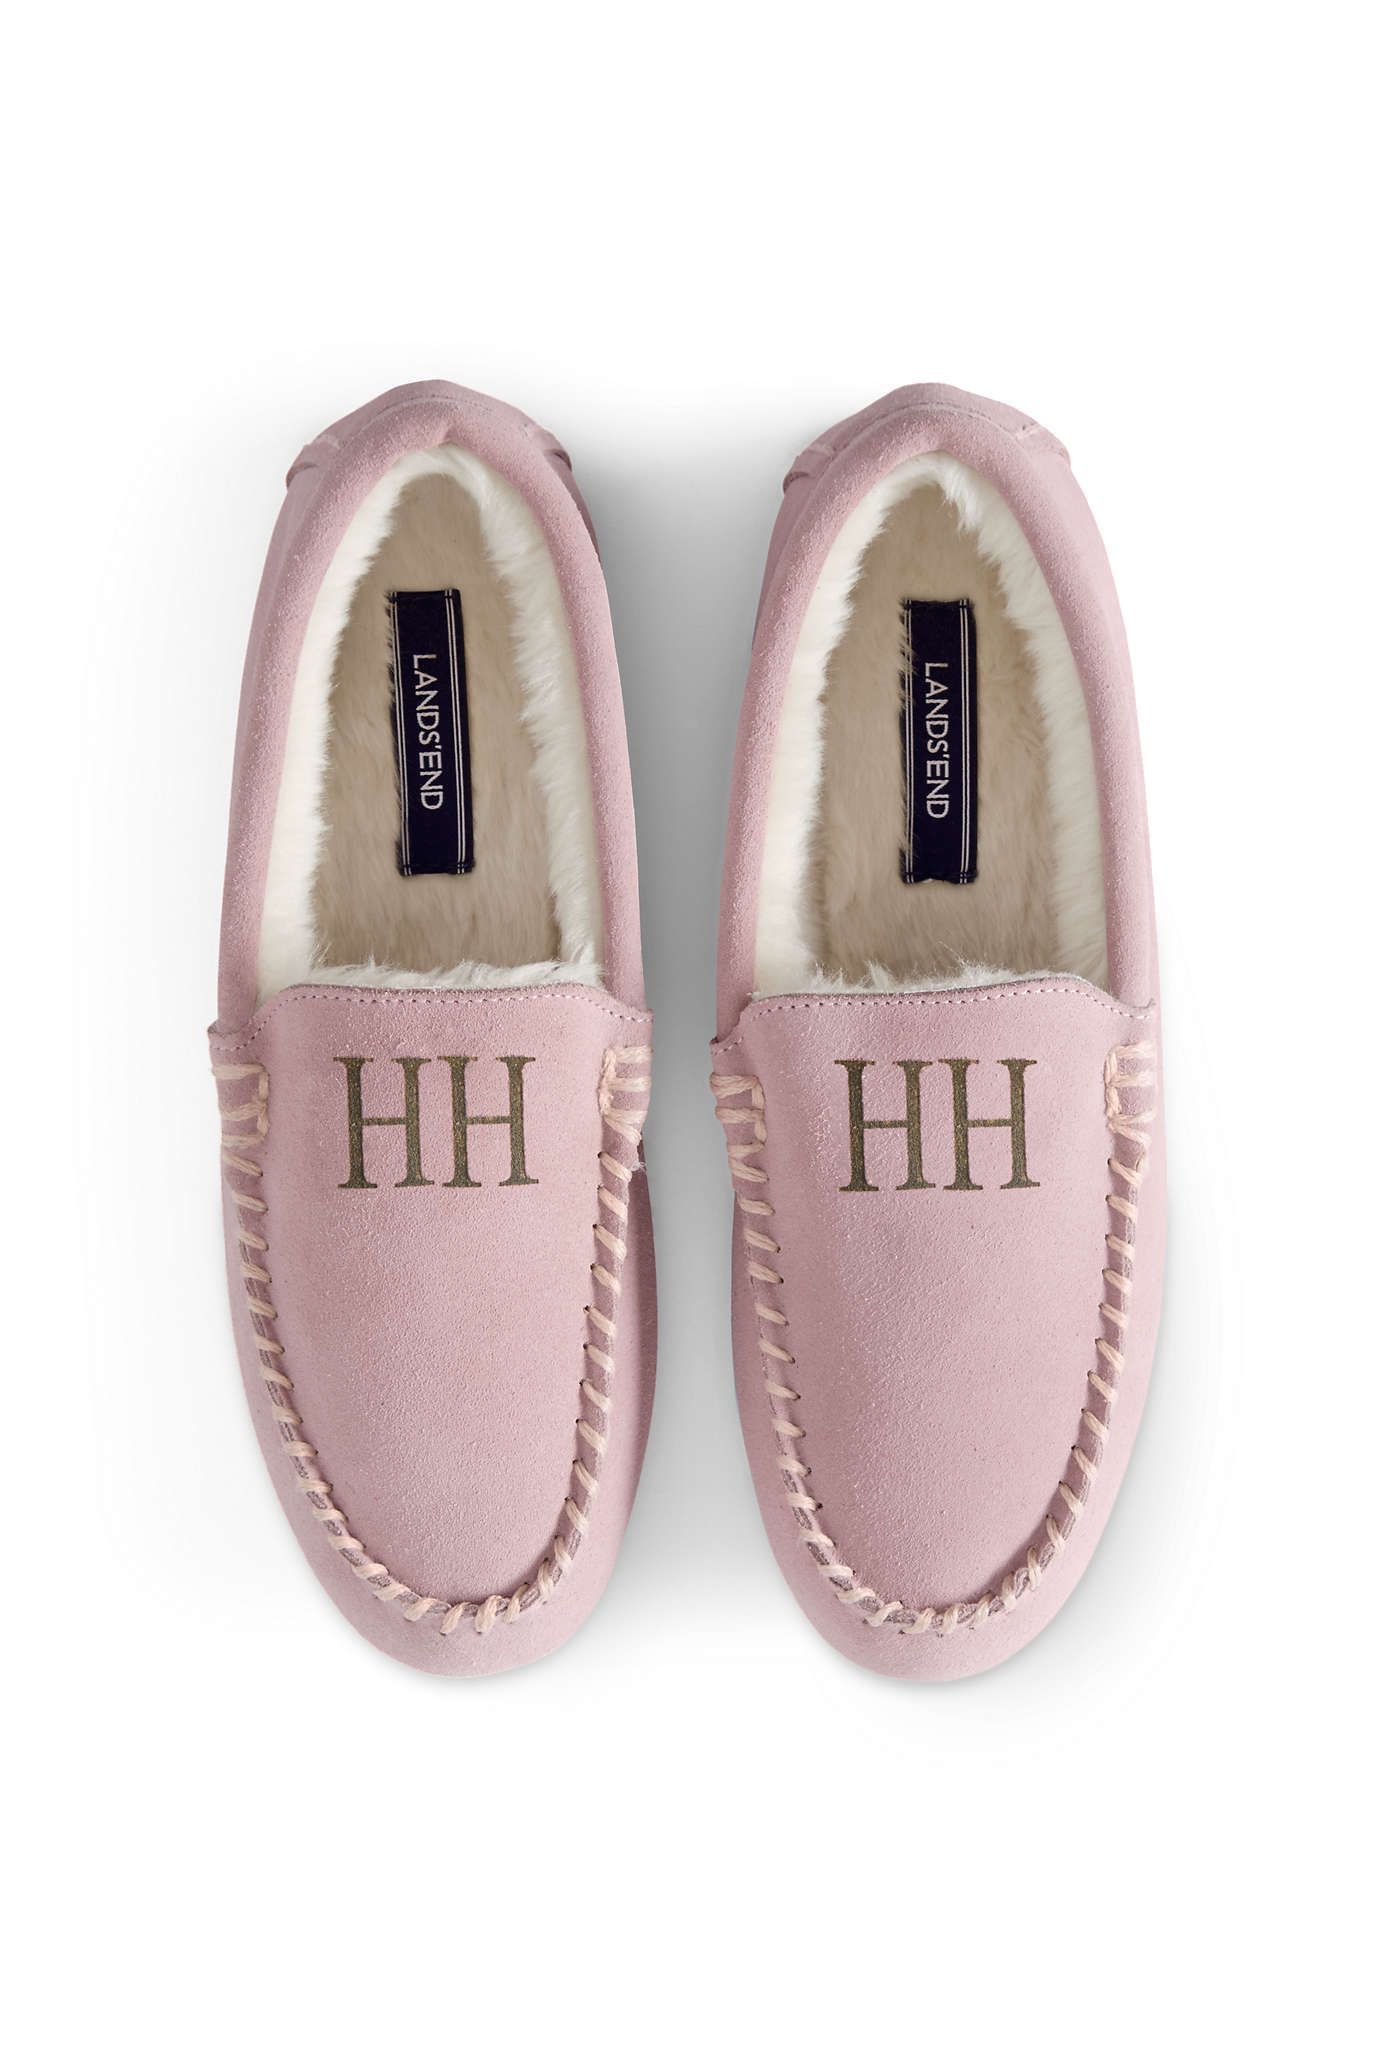 expensive house slippers